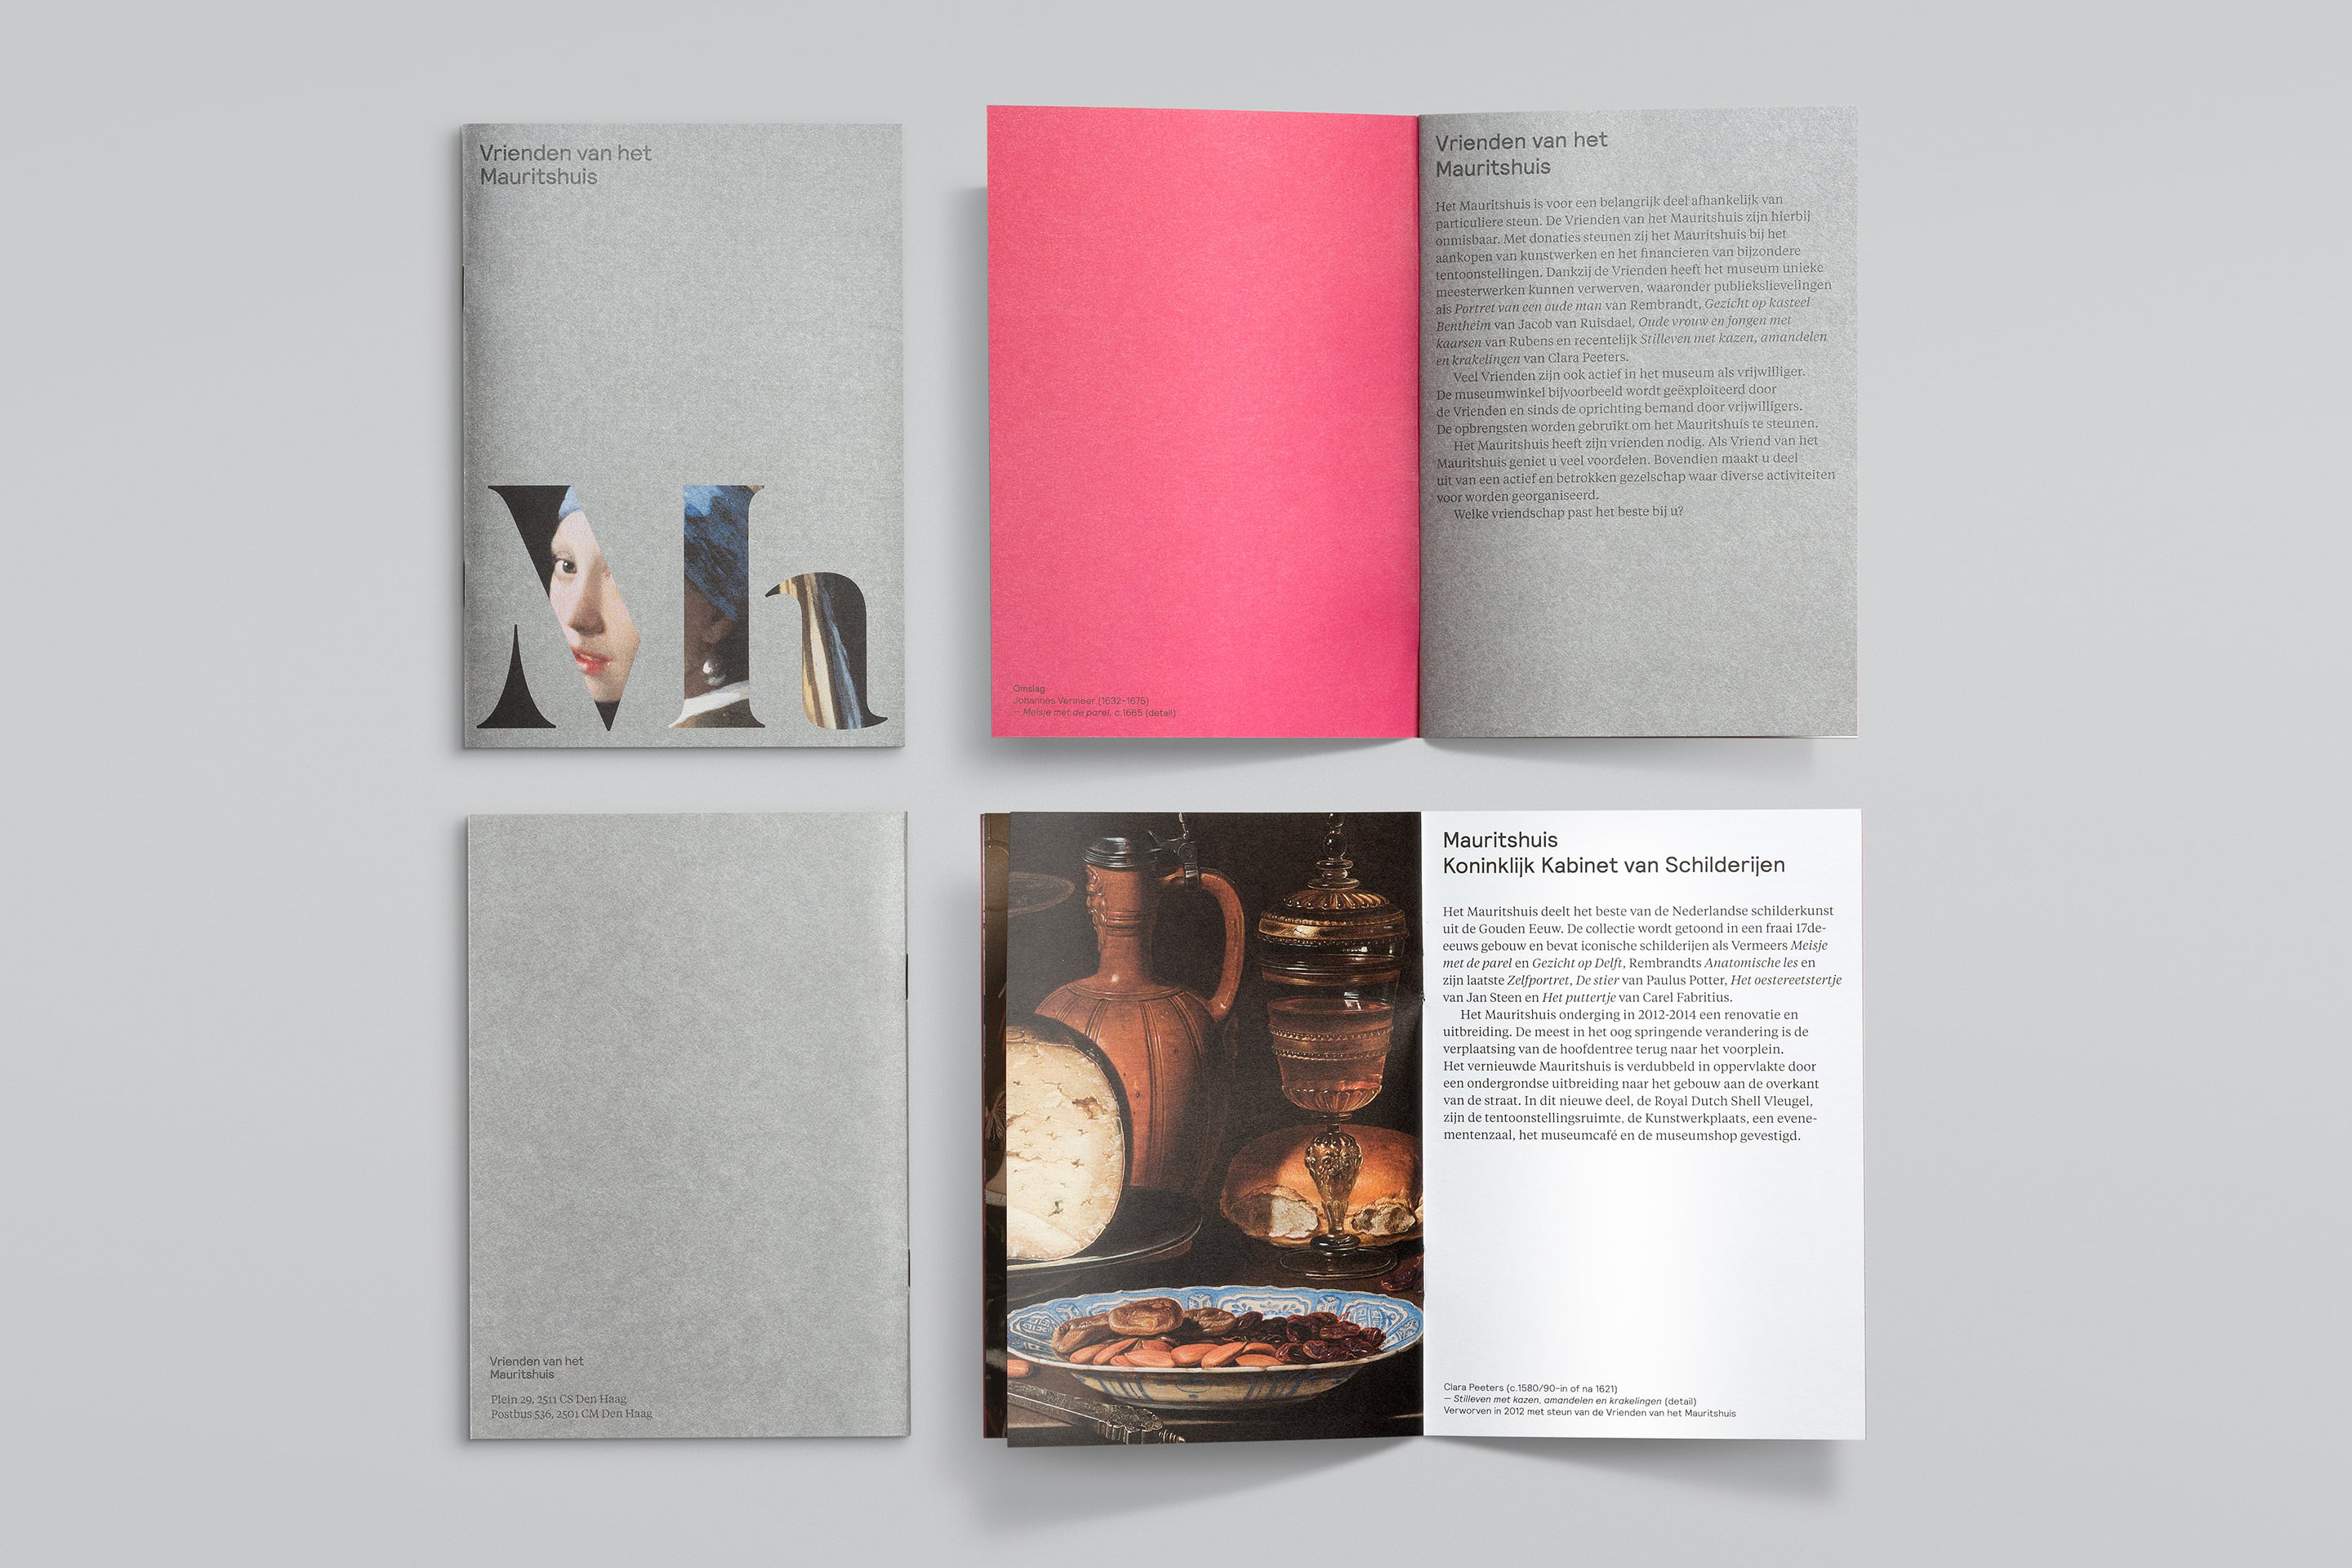 studio dumbar design visual brand identity for Mauritshuis Royal Picture Gallery friends of the mauritshuis brocure design